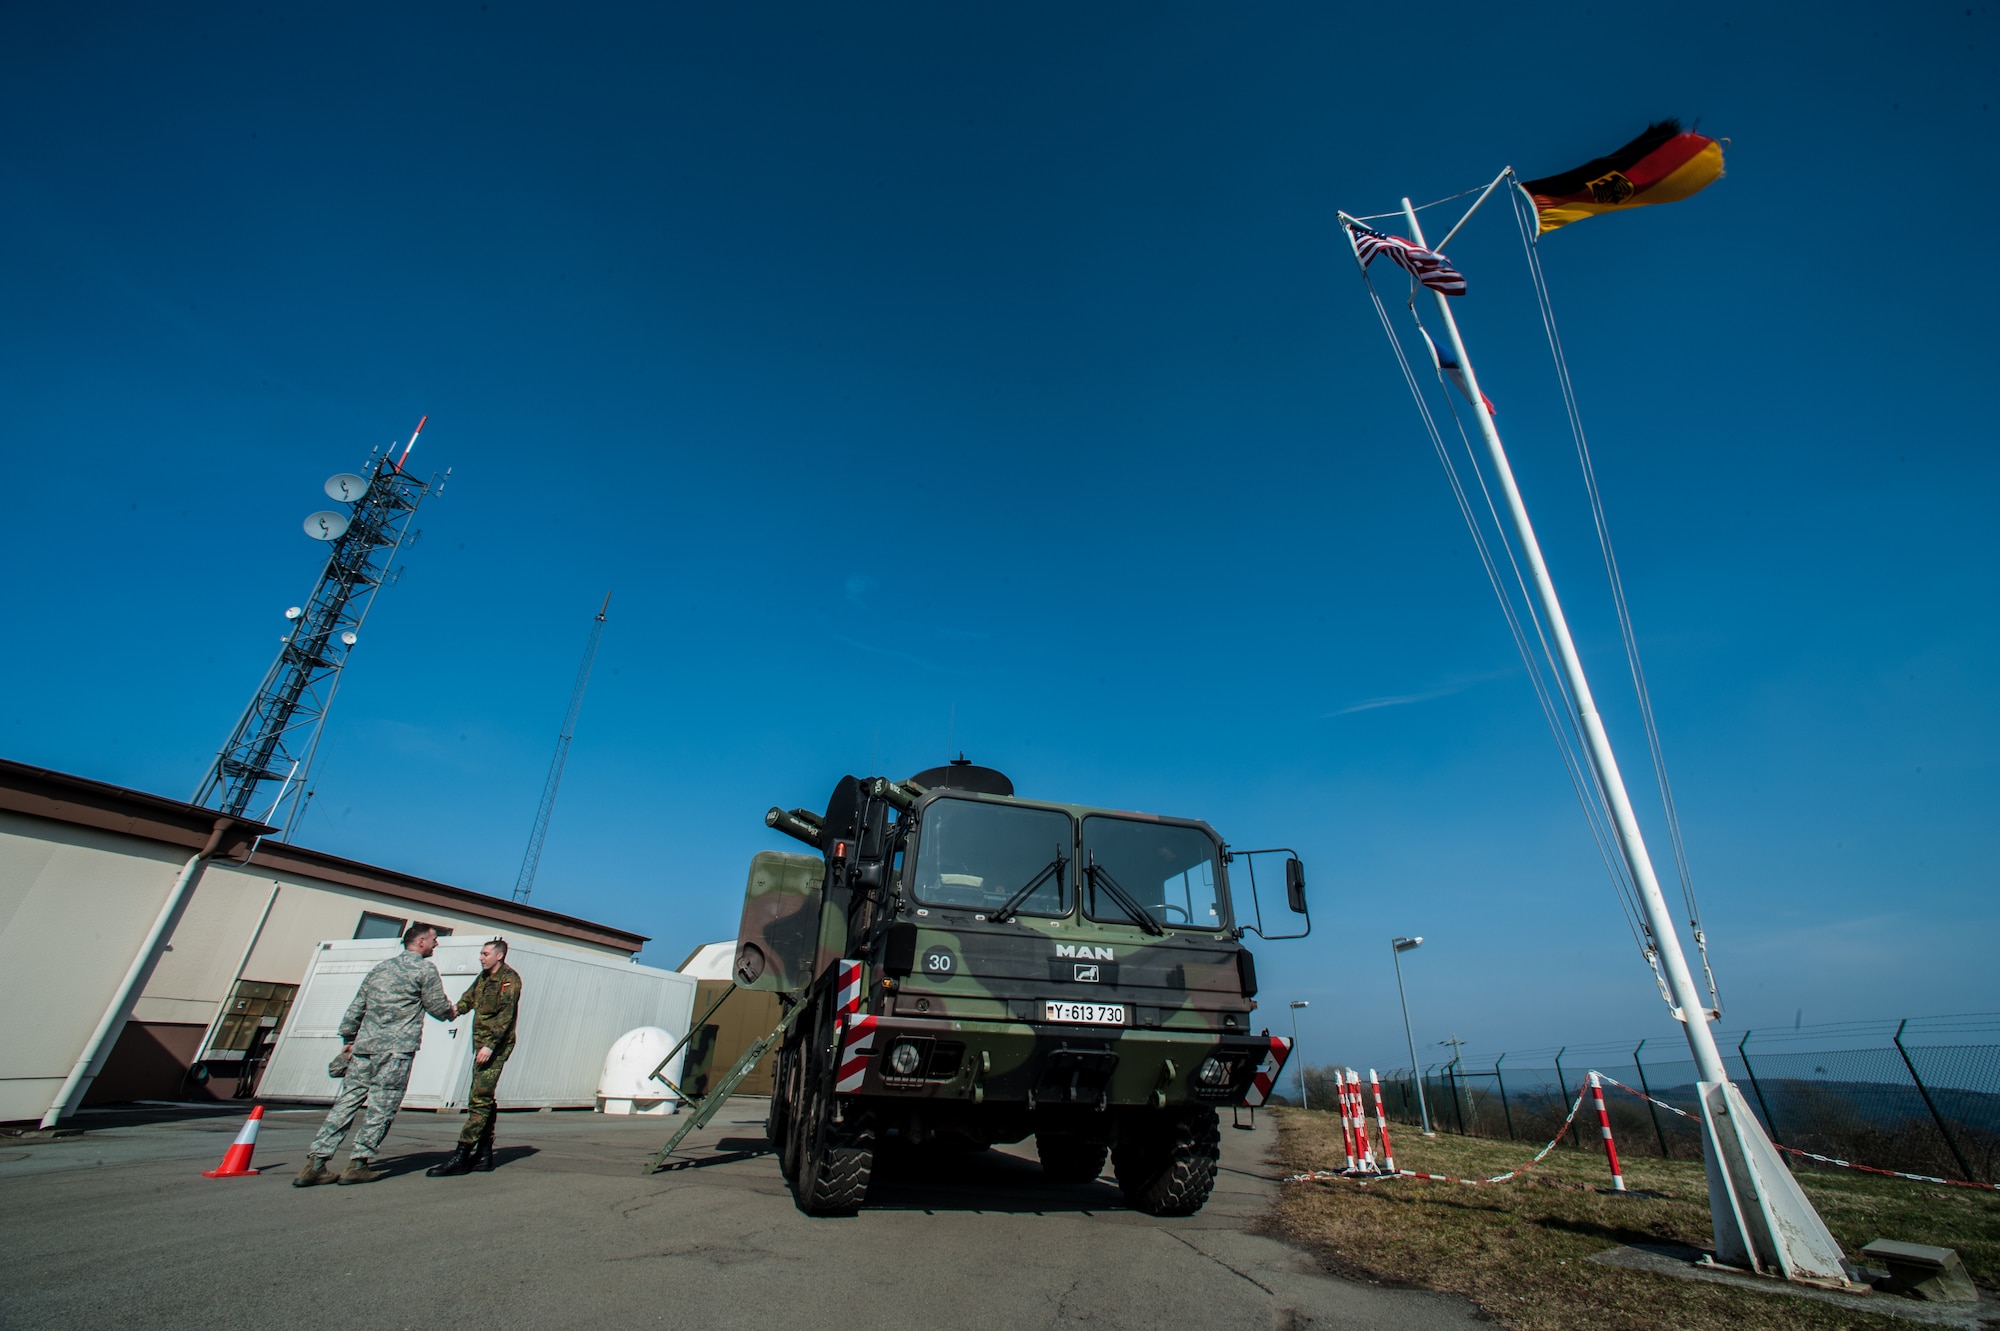 U.S. Air Force Col. Cloyce Adams, Polygone Warrior Preparation Center Detachment 3 commander, shakes hands with German army Master Sgt. Bernhard `Fledermausmann` Huetter, PWPC operator, next to a Roland surface-to-air missile at the Polygone Electronic Warfare Range in Bahn, Germany, March 18, 2015. Roland surface-to-air missiles offer a chance for pilots to train on live radar systems to prepare them for real-world scenarios. (U.S. Air Force photo/Senior Airman Nicole Sikorski)